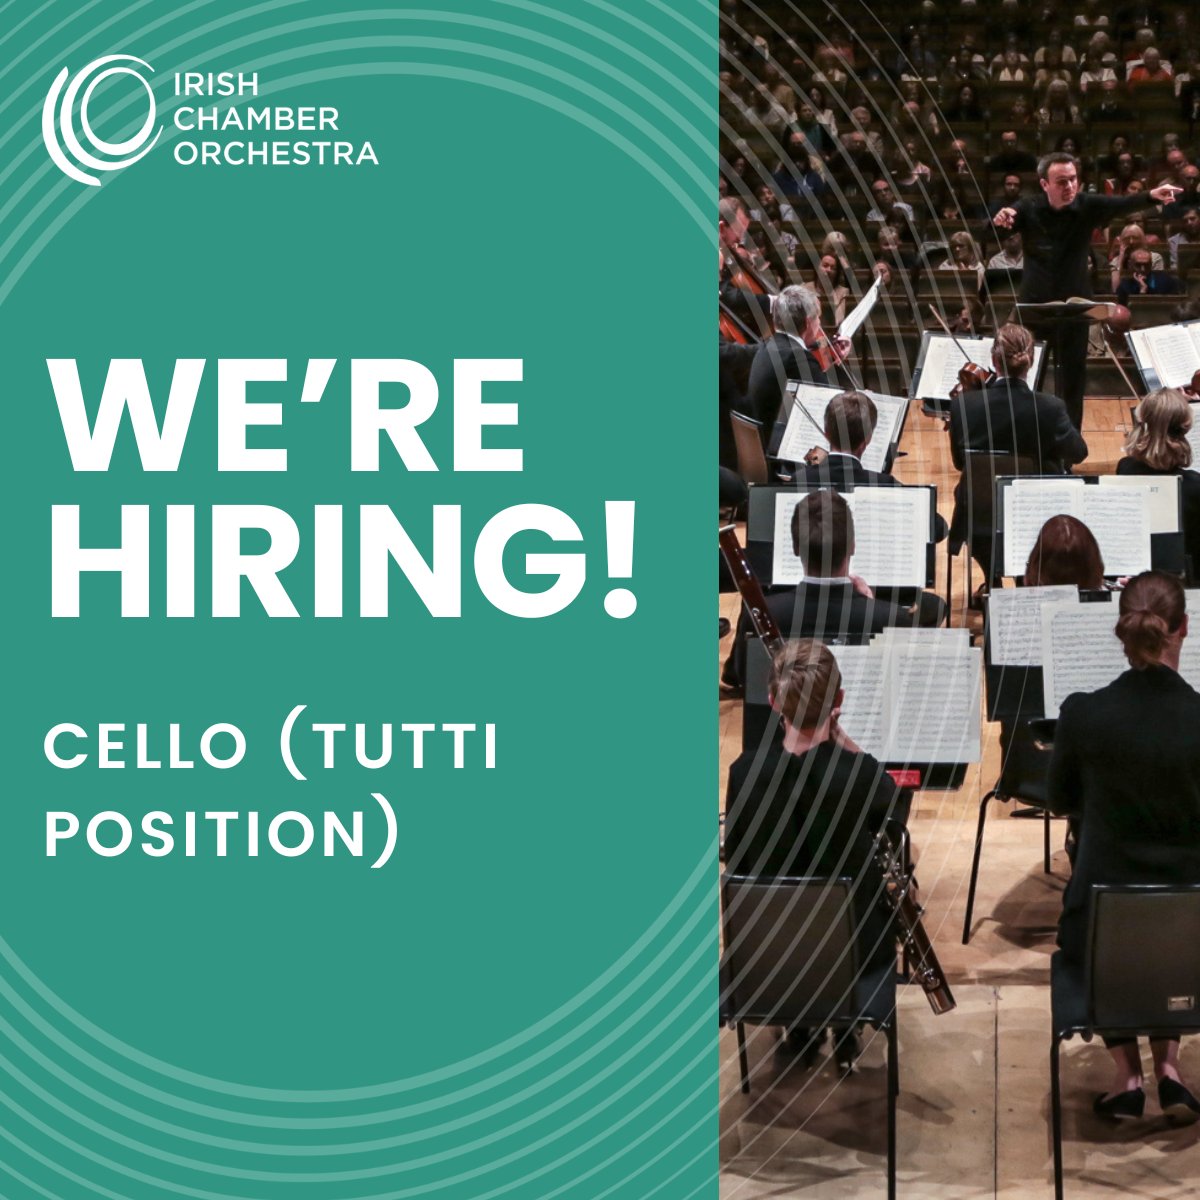 Join us! The Irish Chamber Orchestra invites applications for a Cellist (Tutti Position). The closing date for applications is December 22nd 2023 by 5pm, so apply now! Find out more: irishchamberorchestra.com/about/job-vaca… #MusicJobs #ClassicalMusicJobs #JobOpportunity #IrishMusic